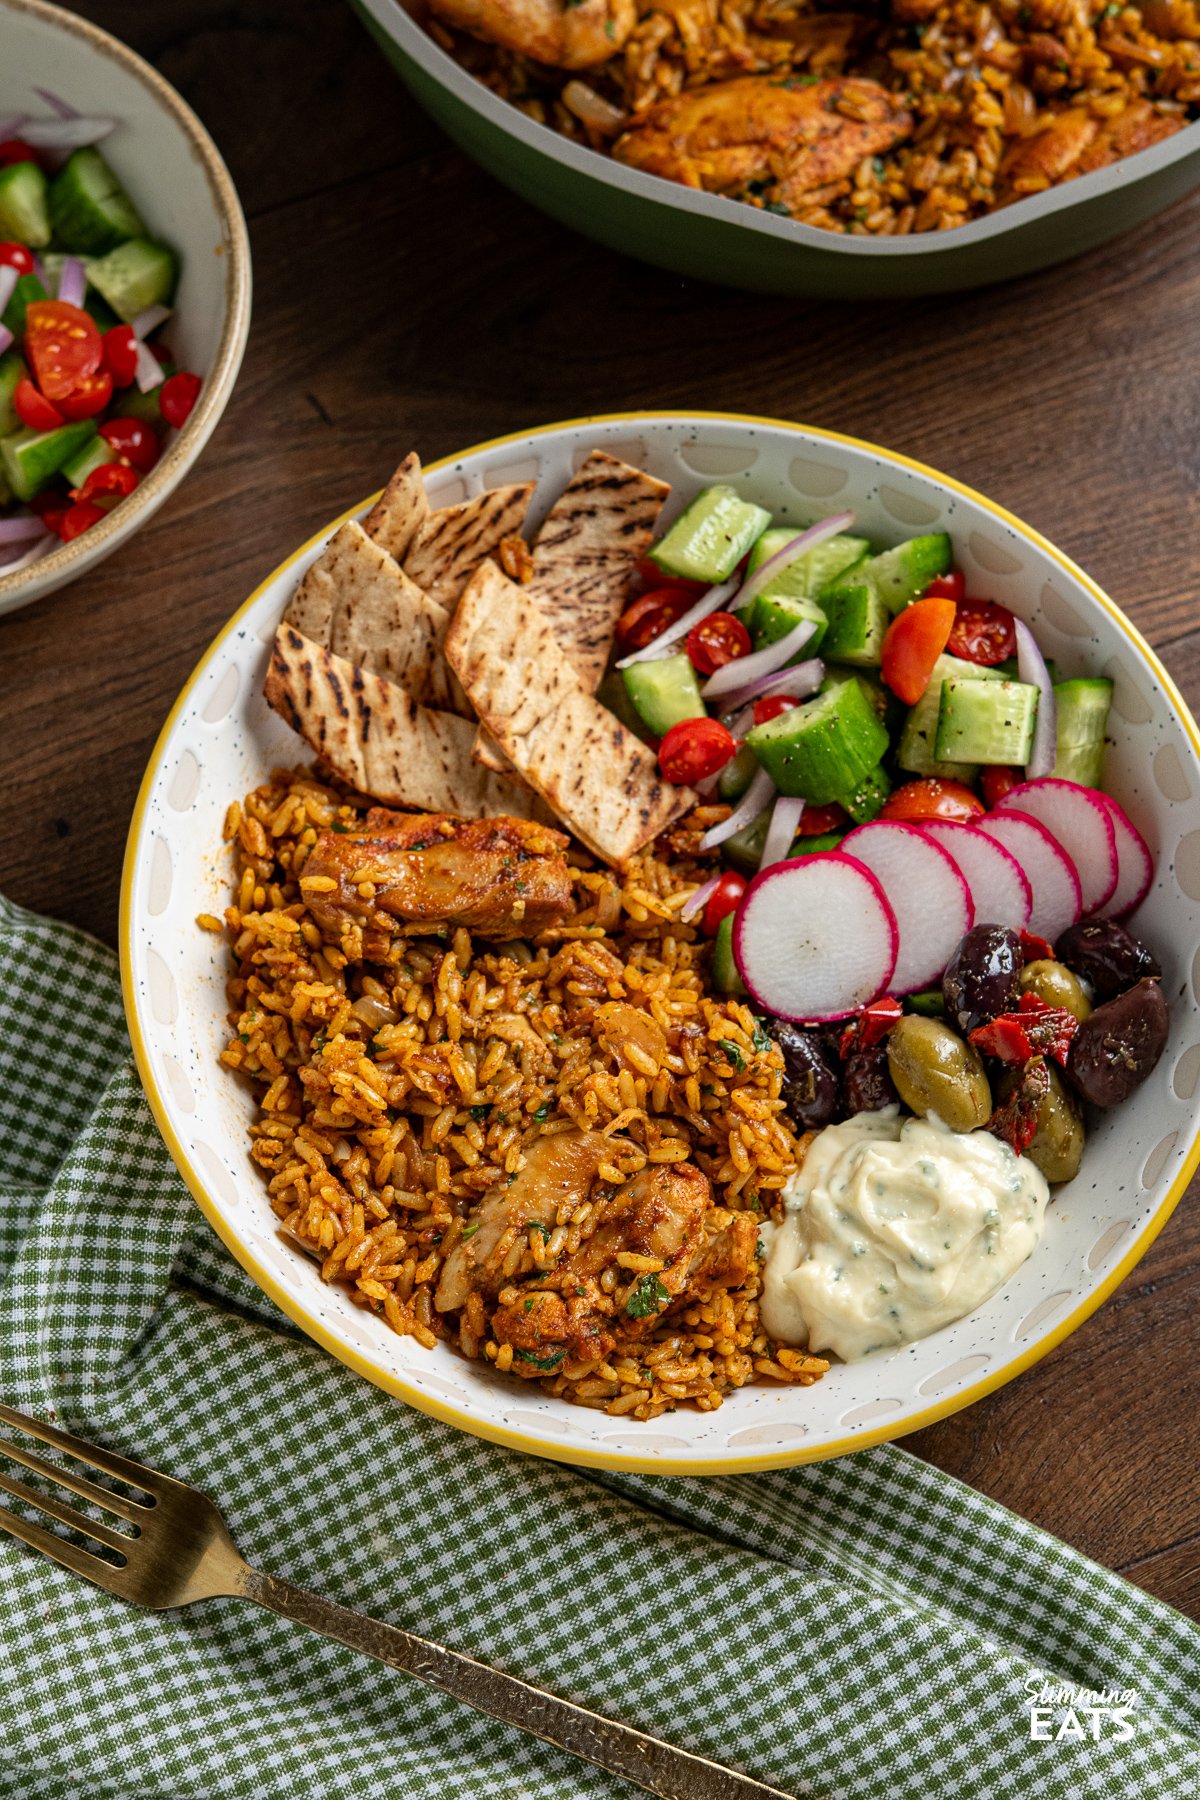 chicken shawarma and rice bowl with olives, cucumber, tomato, red onion and pita bread with garlic sauce